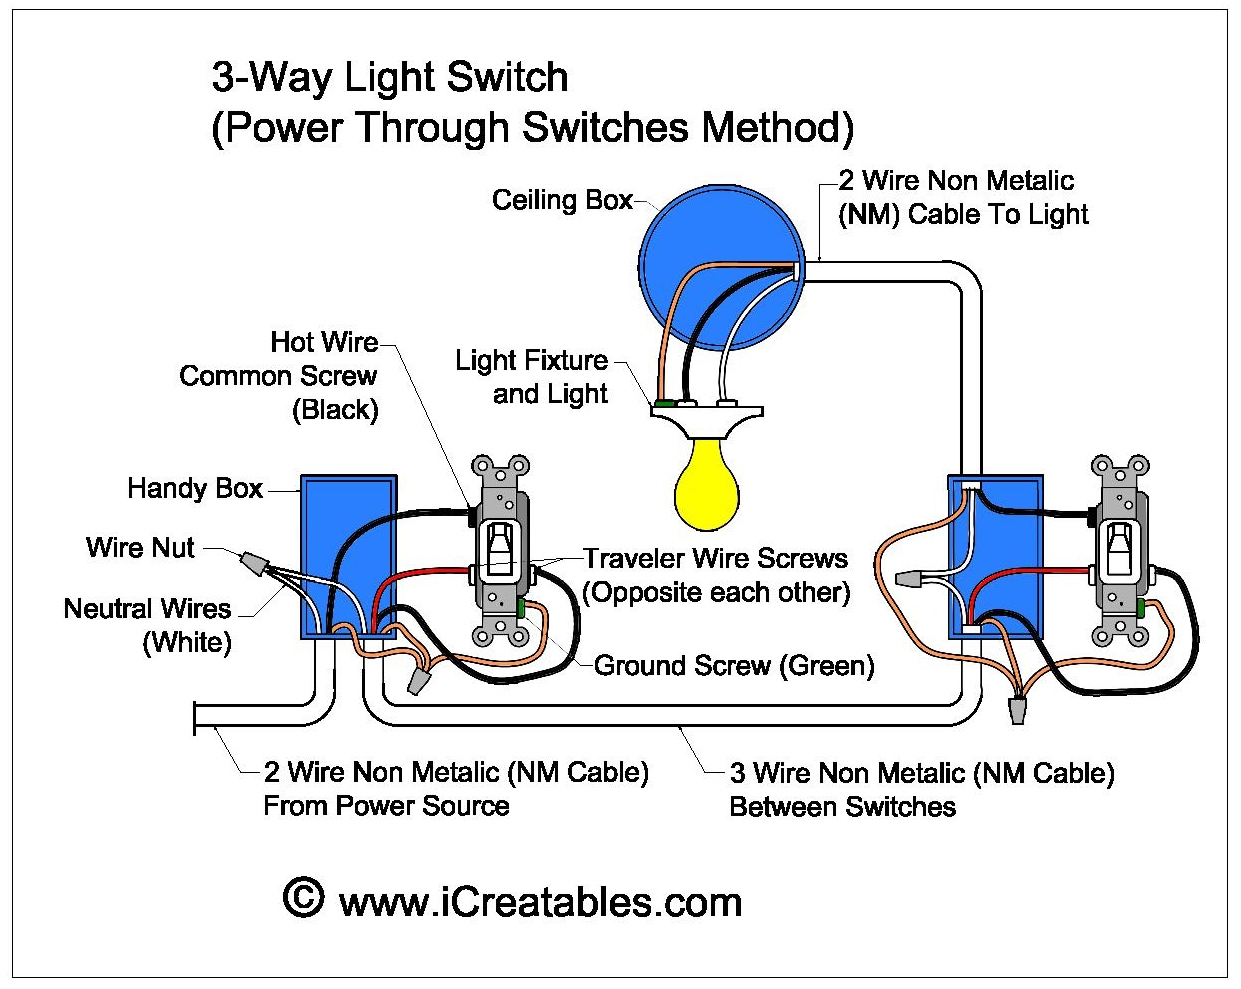 Leviton Light Switch Wiring Diagram from www.icreatables.com